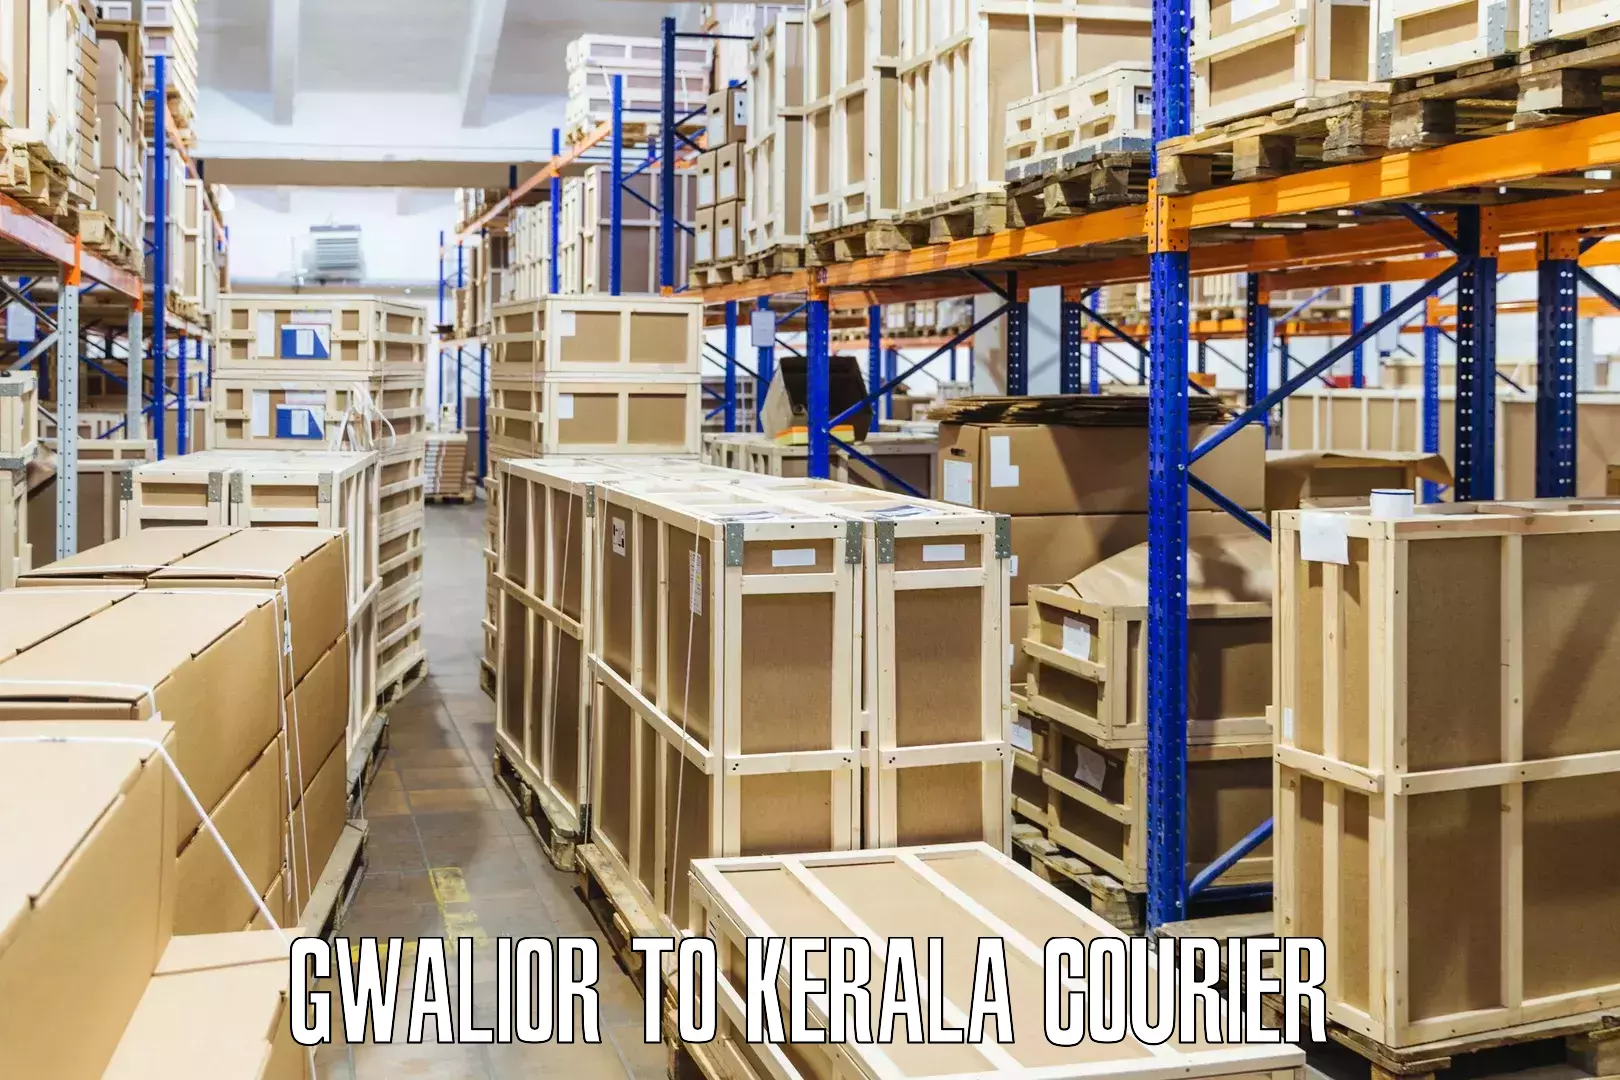 Express package services Gwalior to Guruvayoor